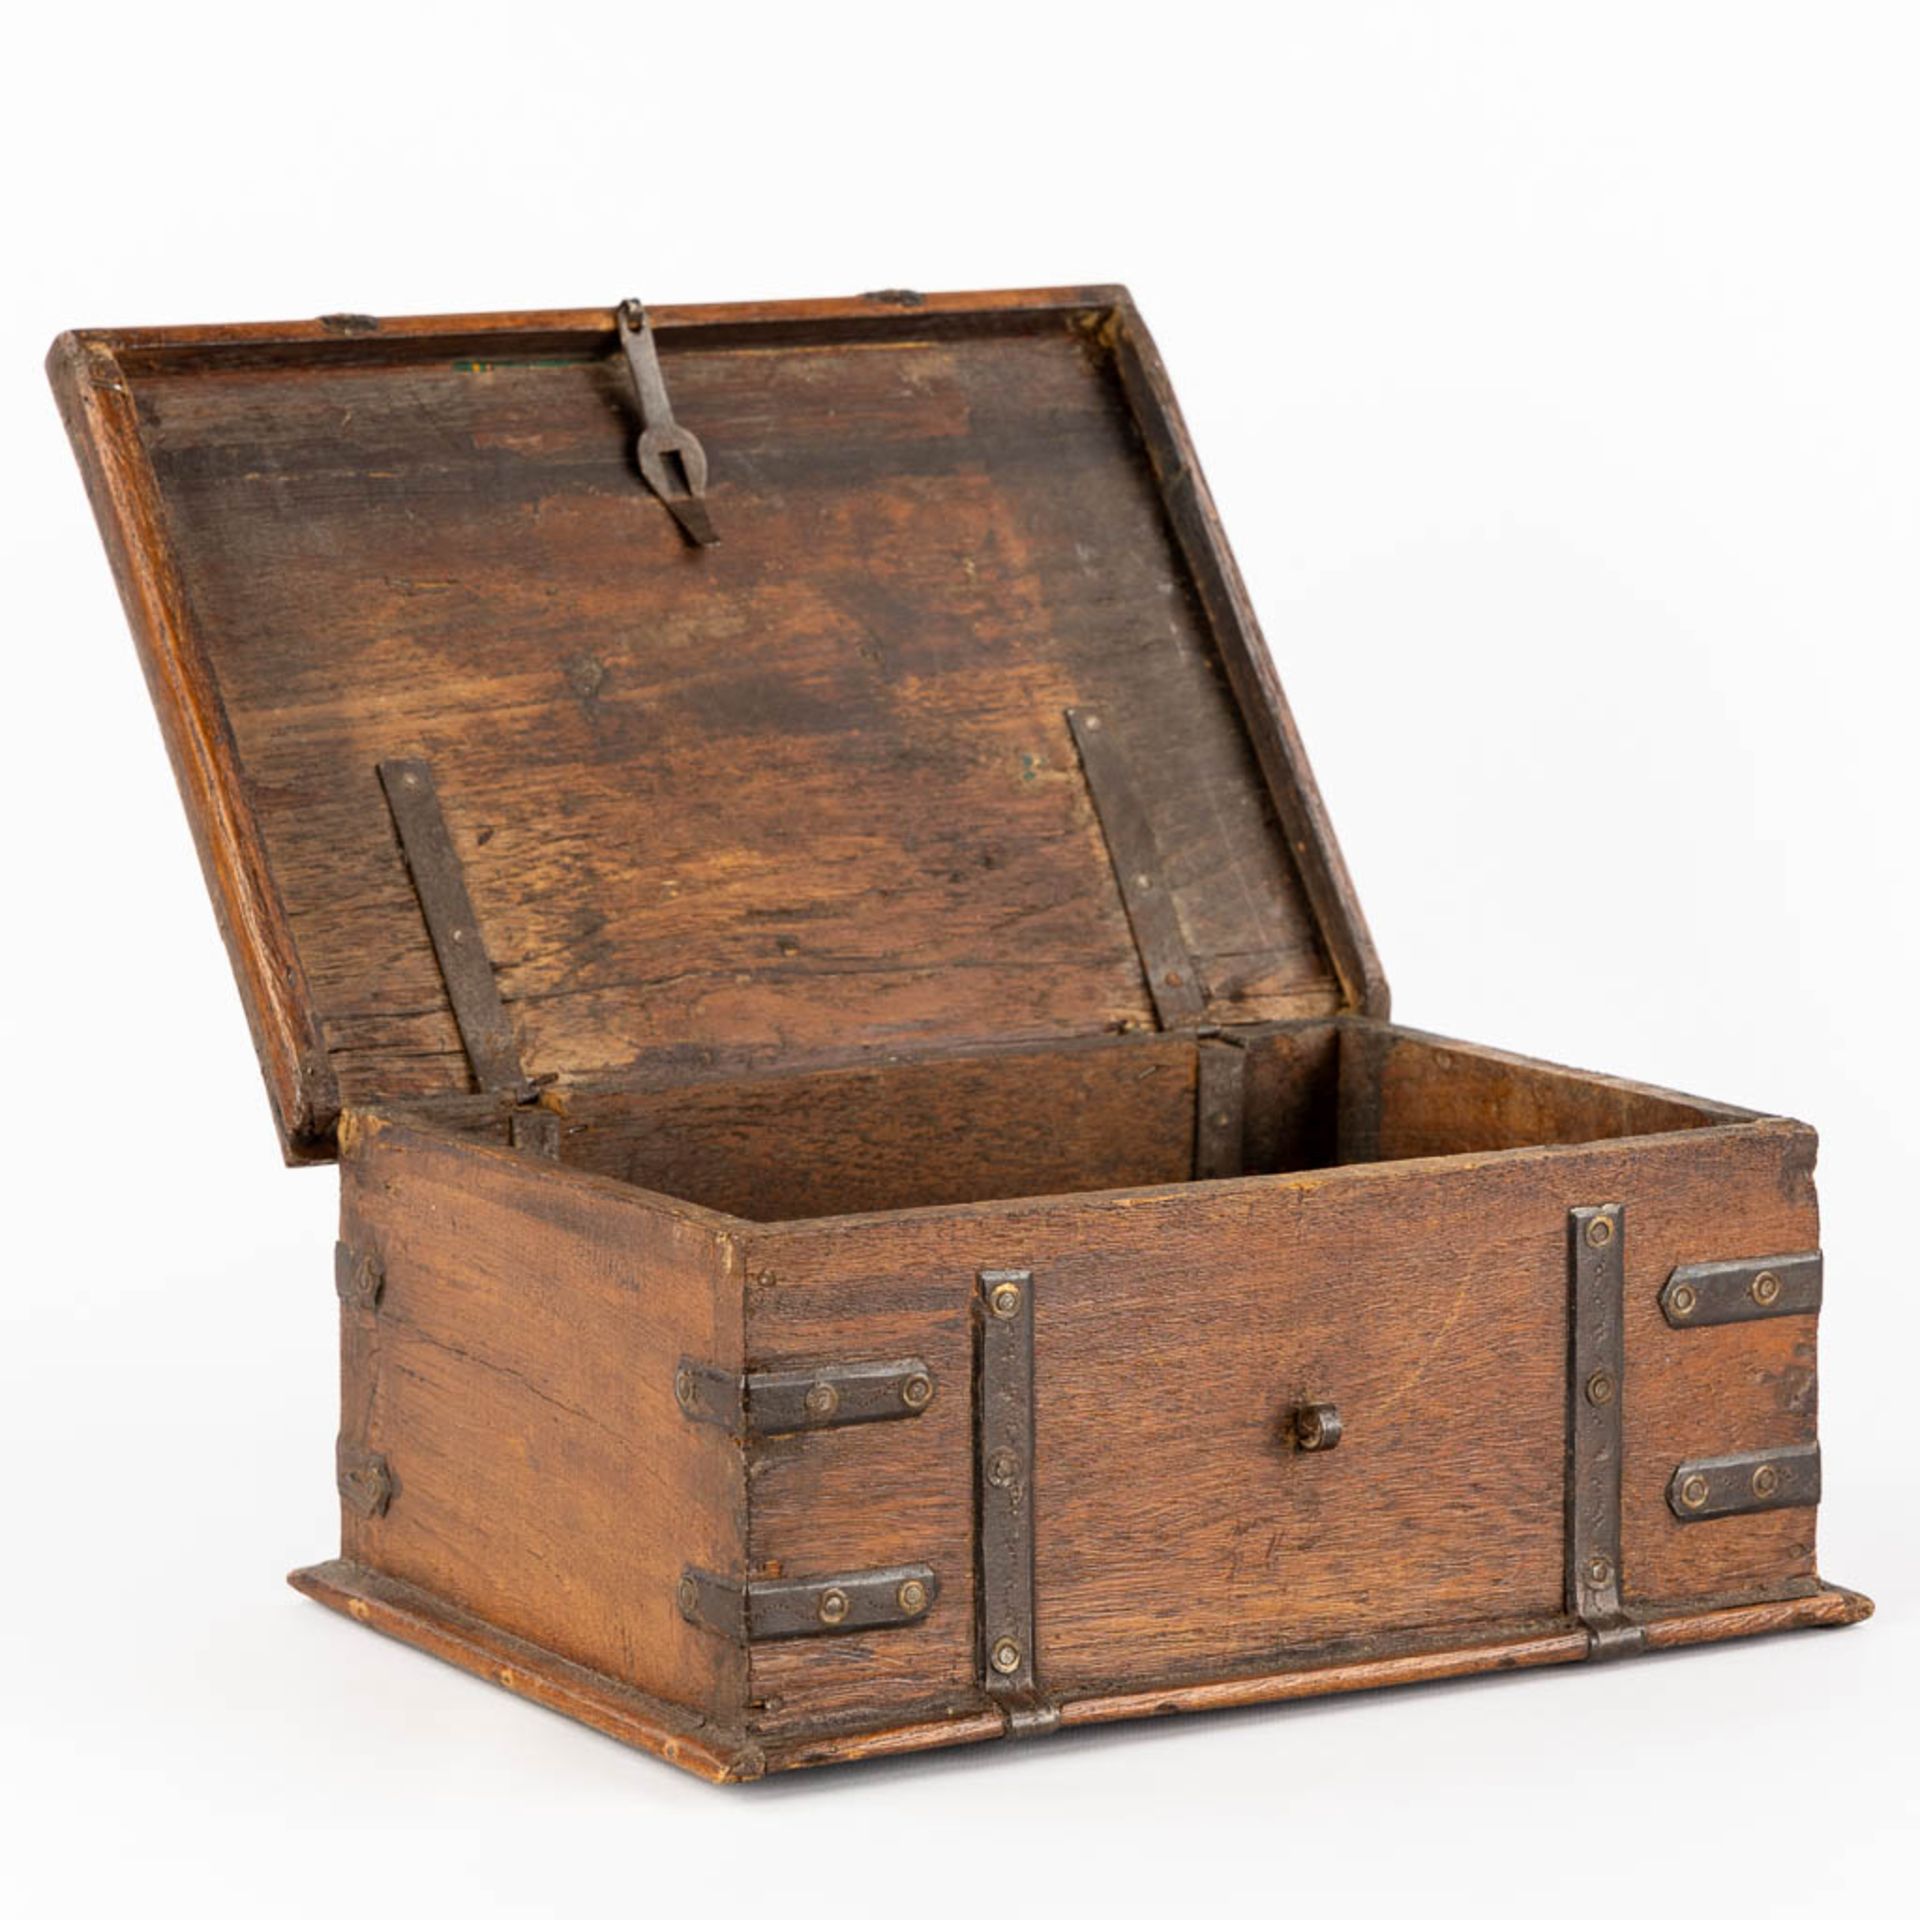 An antique money box or storage chest, oak and wrought iron, 19th C. (L:23 x W:31 x H:13 cm) - Image 7 of 13